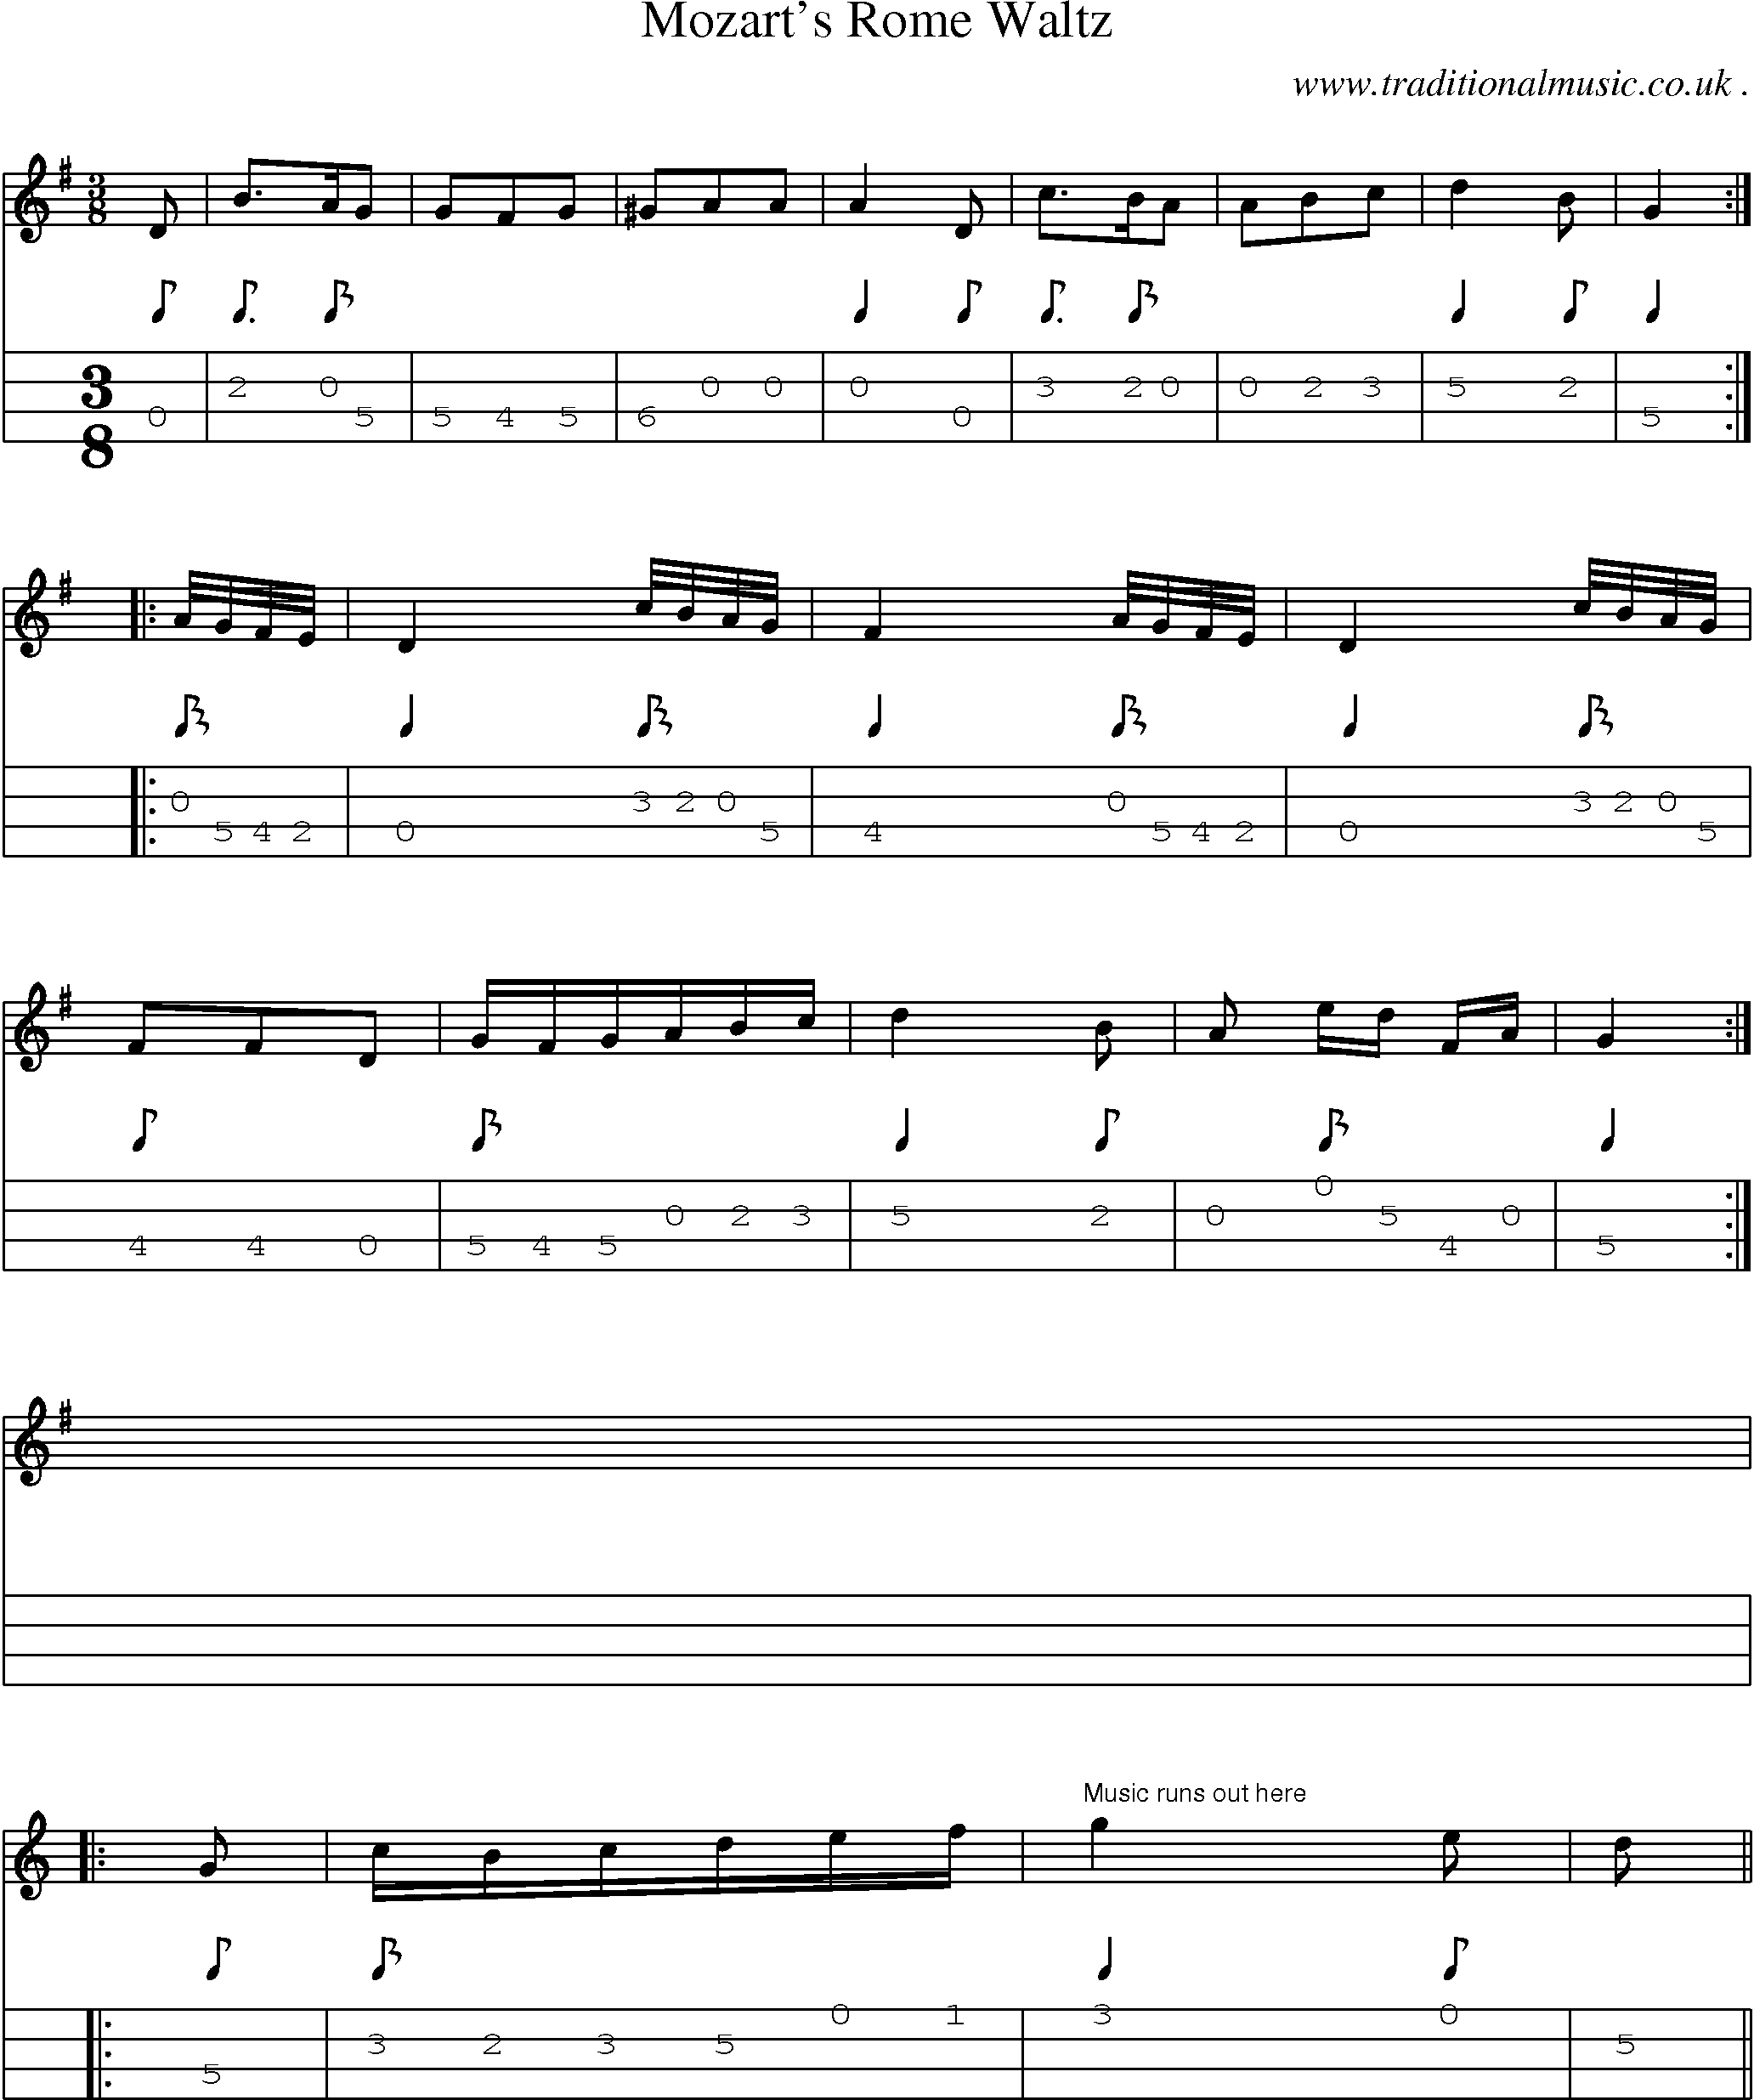 Sheet-Music and Mandolin Tabs for Mozarts Rome Waltz